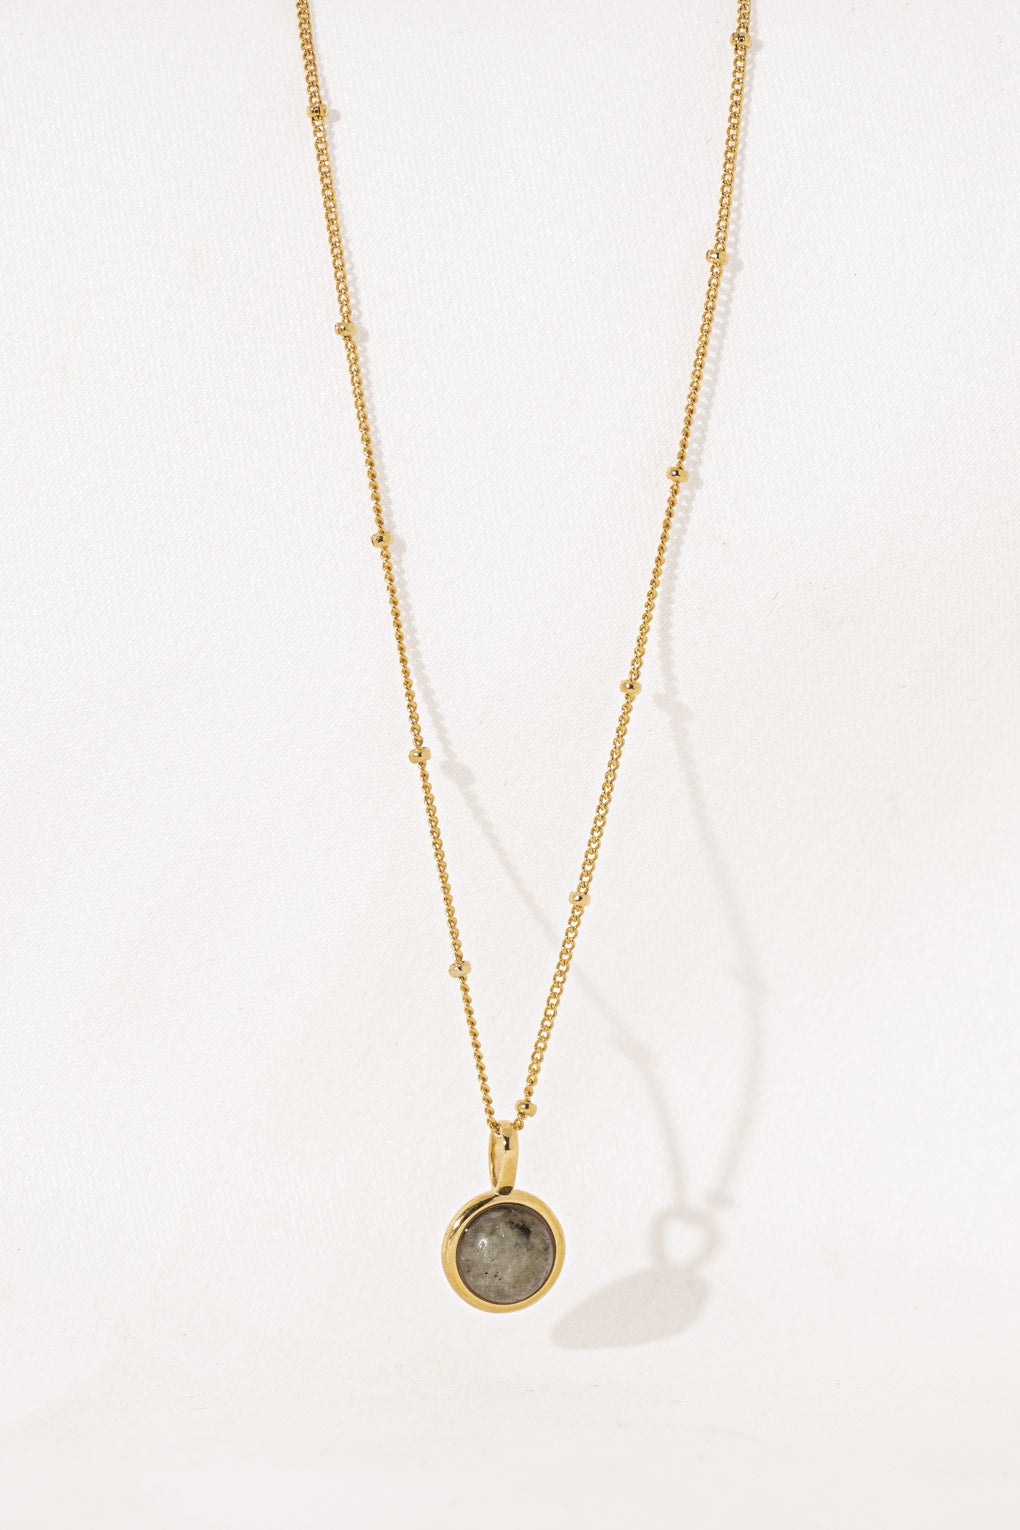 Sherry Necklace - Limited Edition